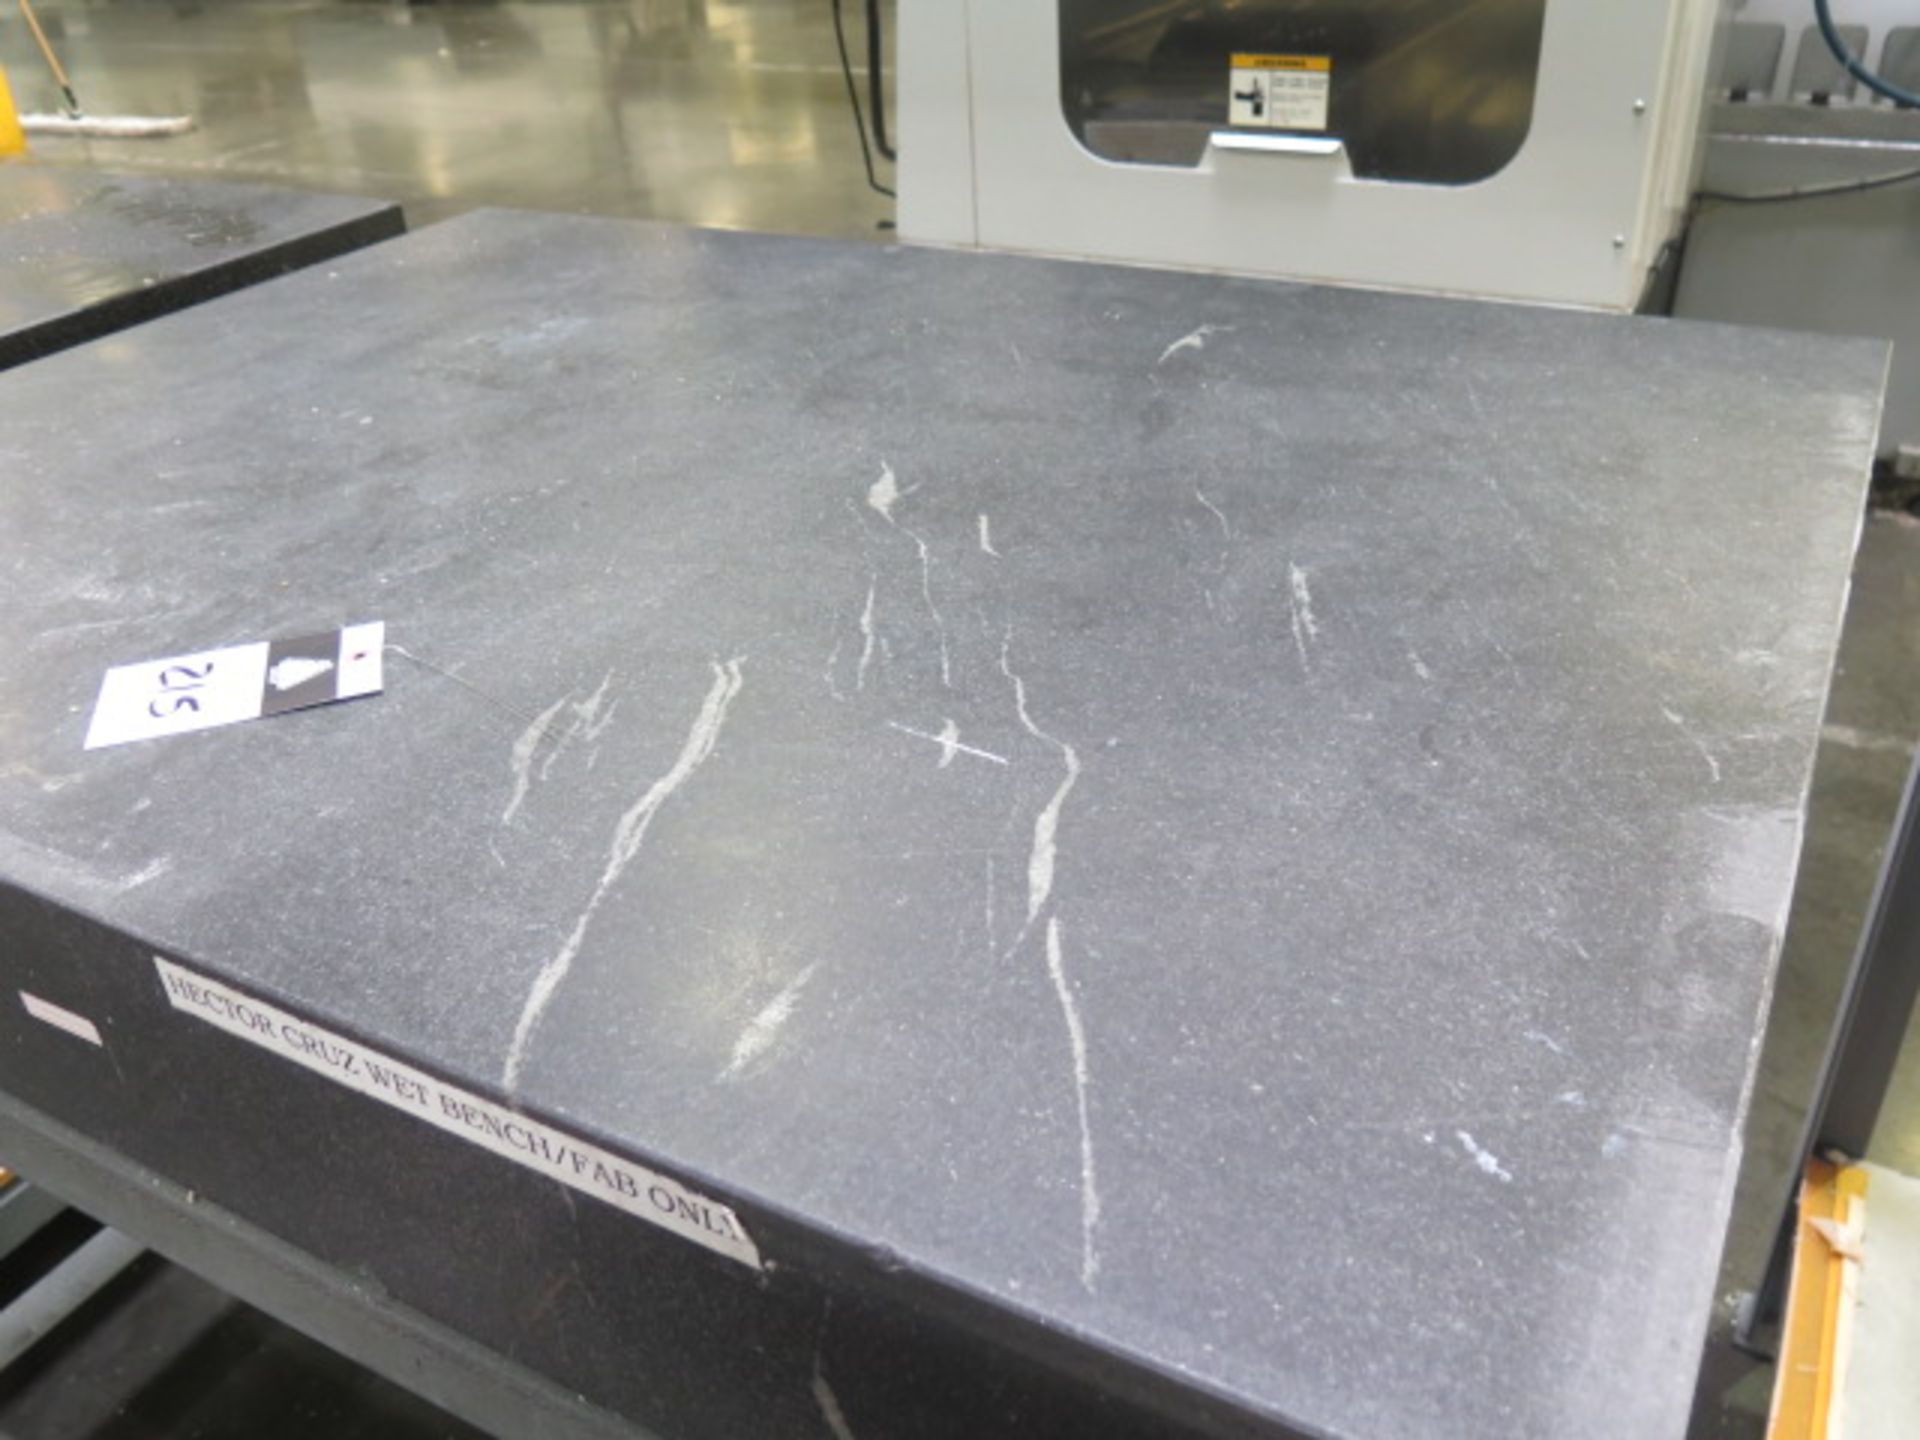 36" x 48" x 6" Granite Surface Plate w/ Stand (SOLD AS-IS - NO WARRANTY) - Image 4 of 5